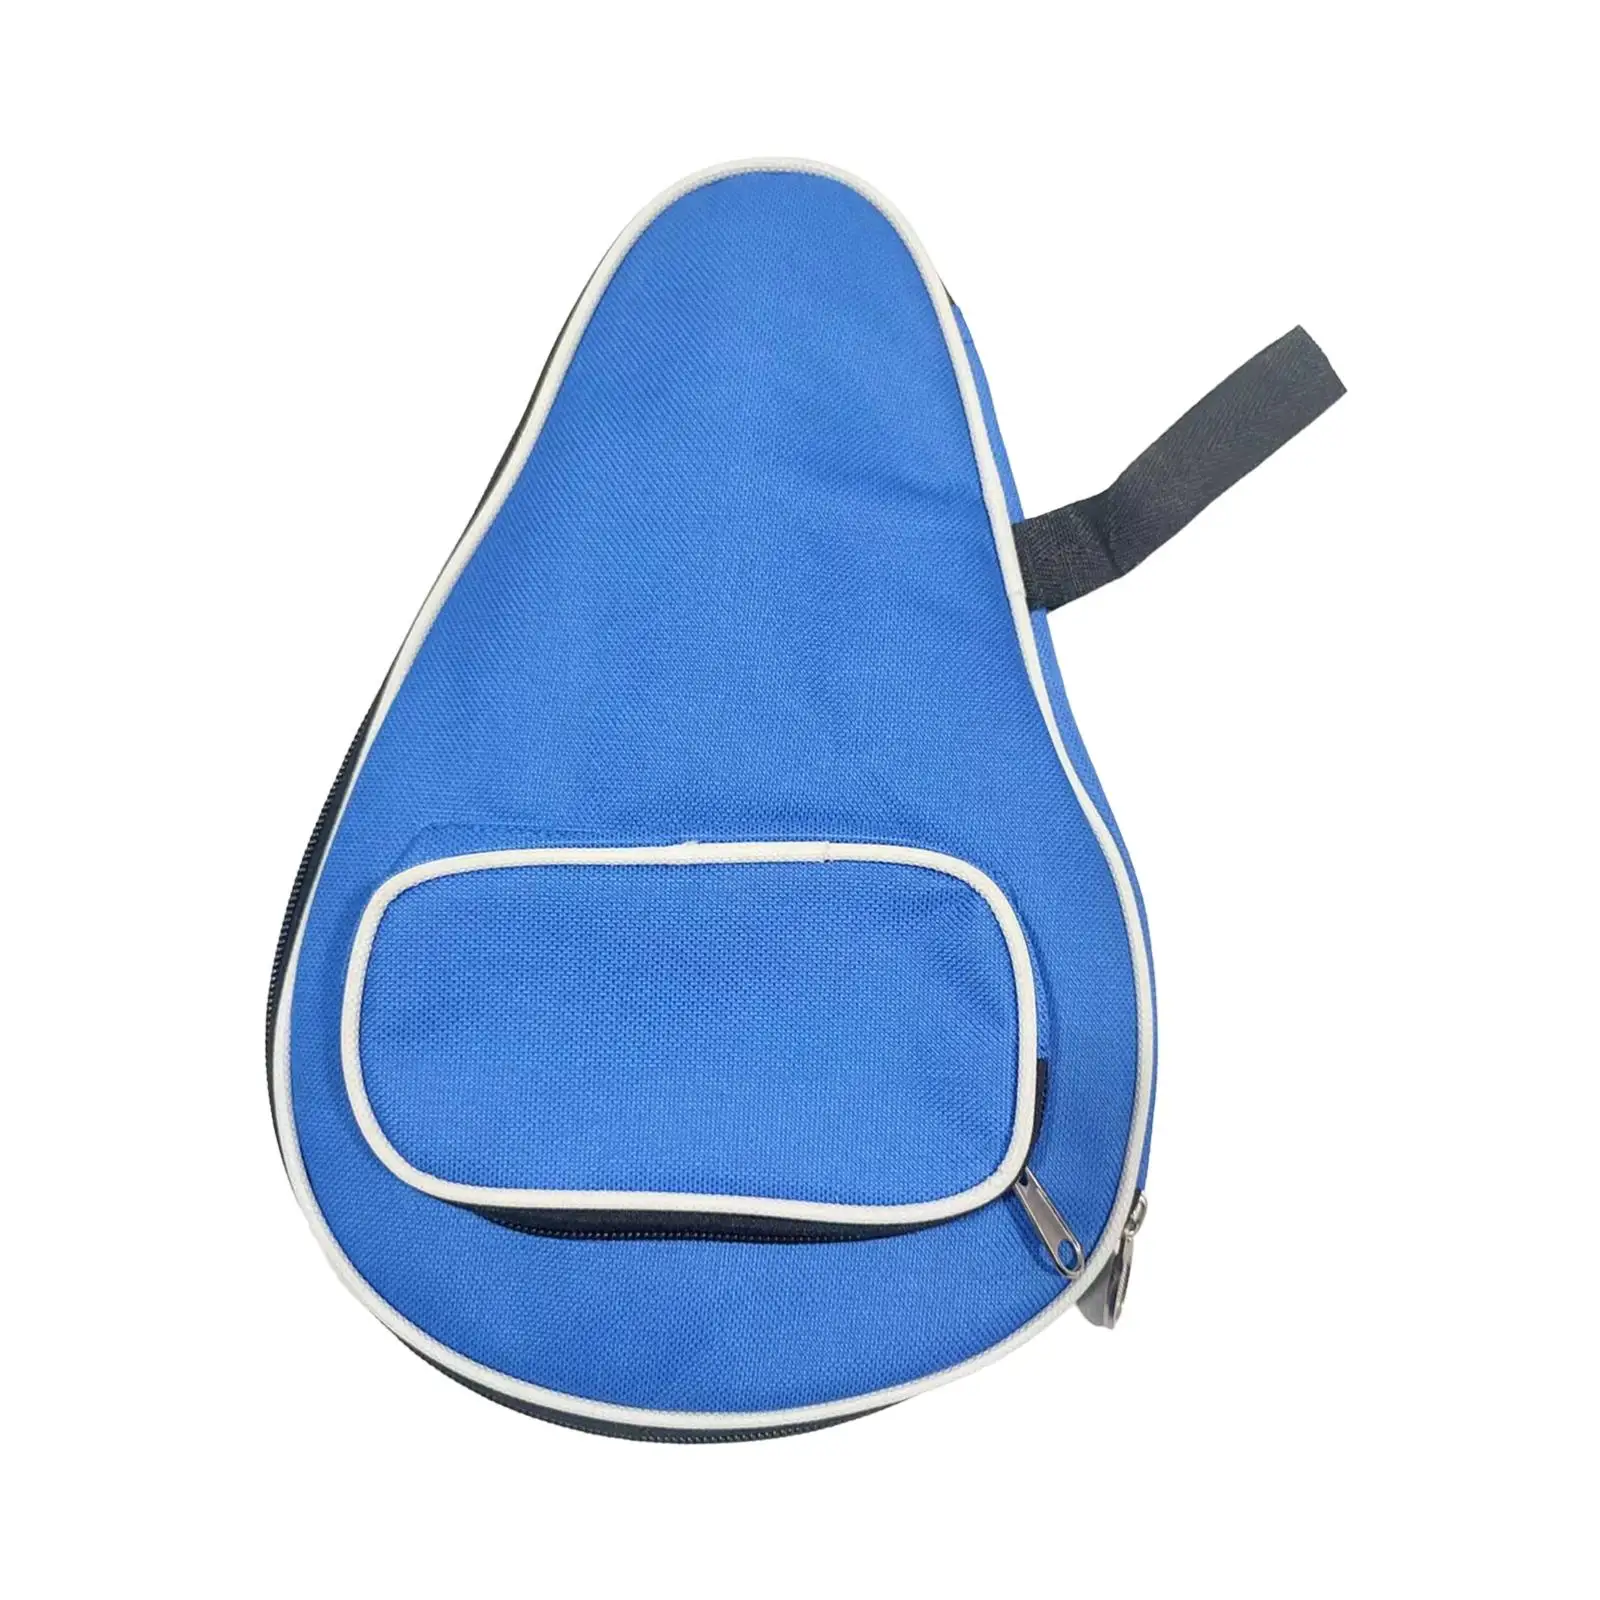 Table Tennis Racket Cover Wear Resistant Lightweight Sturdy Outdoors Practical Racket Pocket for Competition Indoor Travel